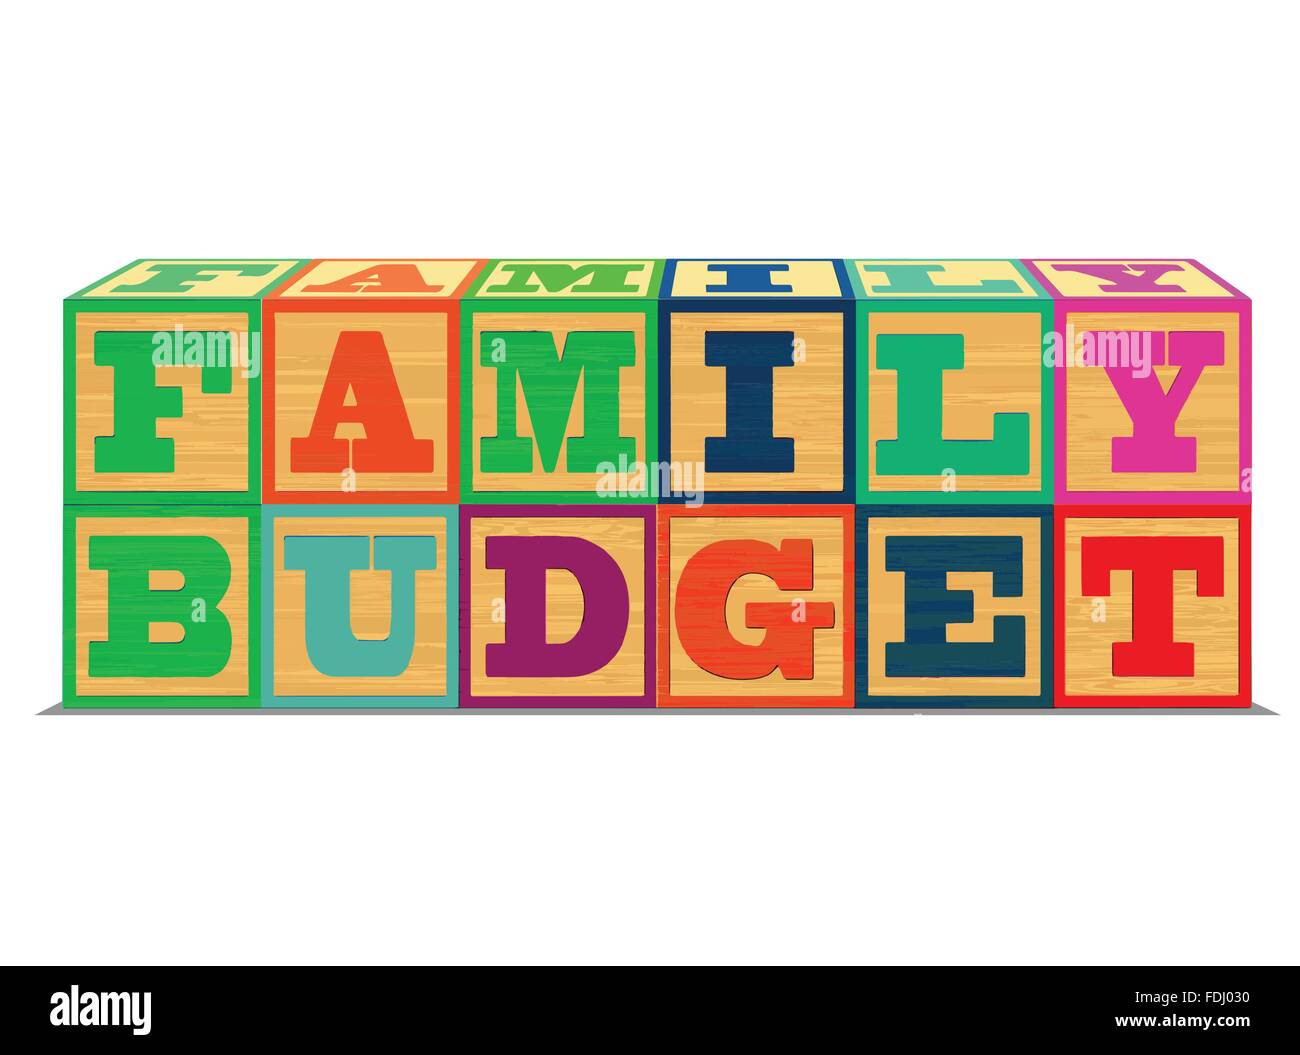 Family Budget Stock Vector